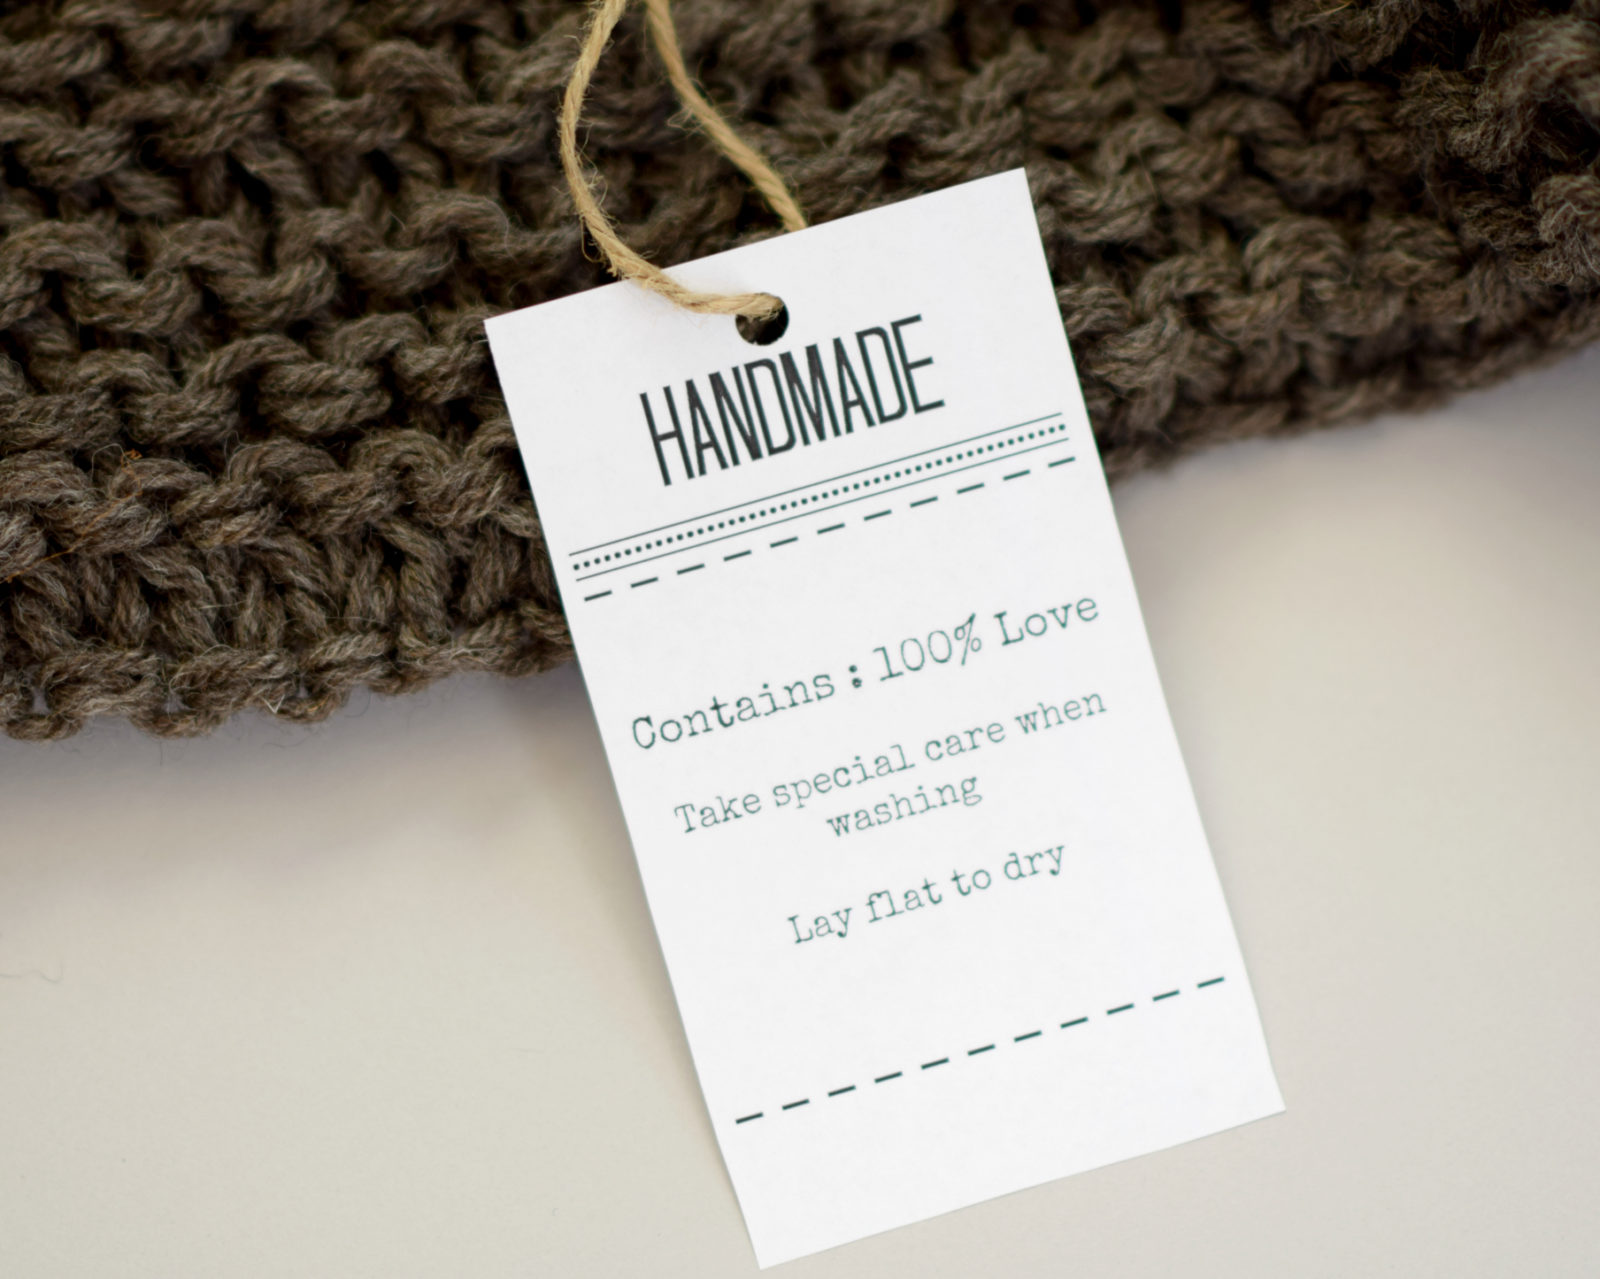 Handmade with love tags, add a tag to your handmade gifts